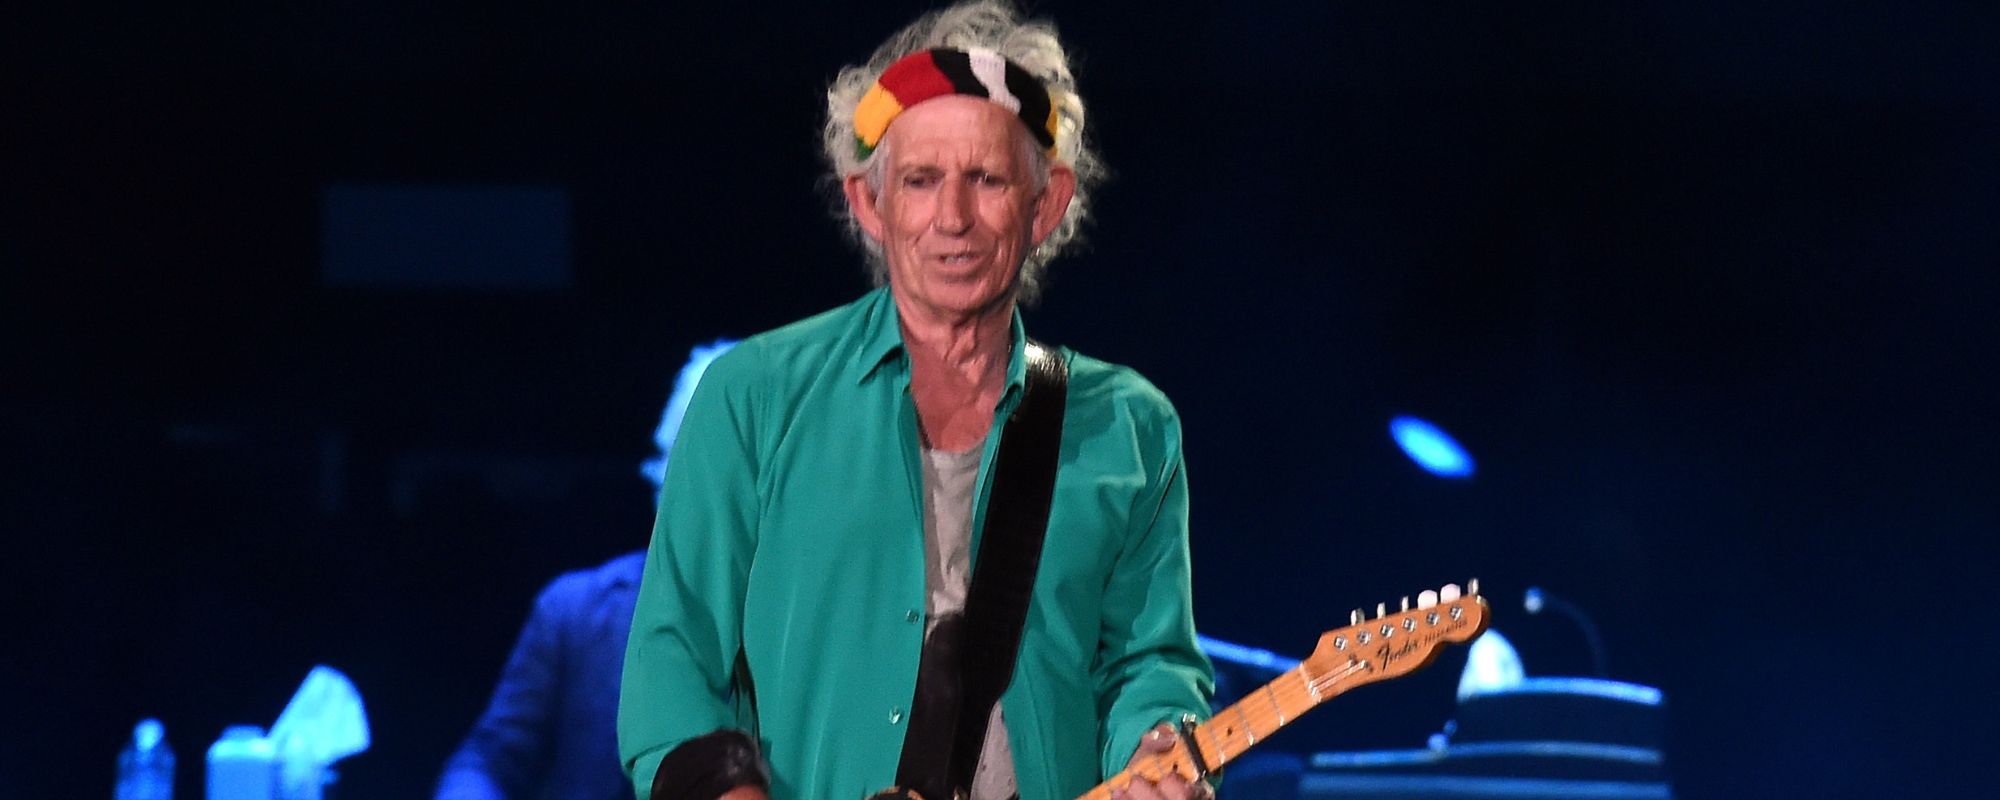 Keith Richards Discusses Sober Life Ahead of New Rolling Stones Album